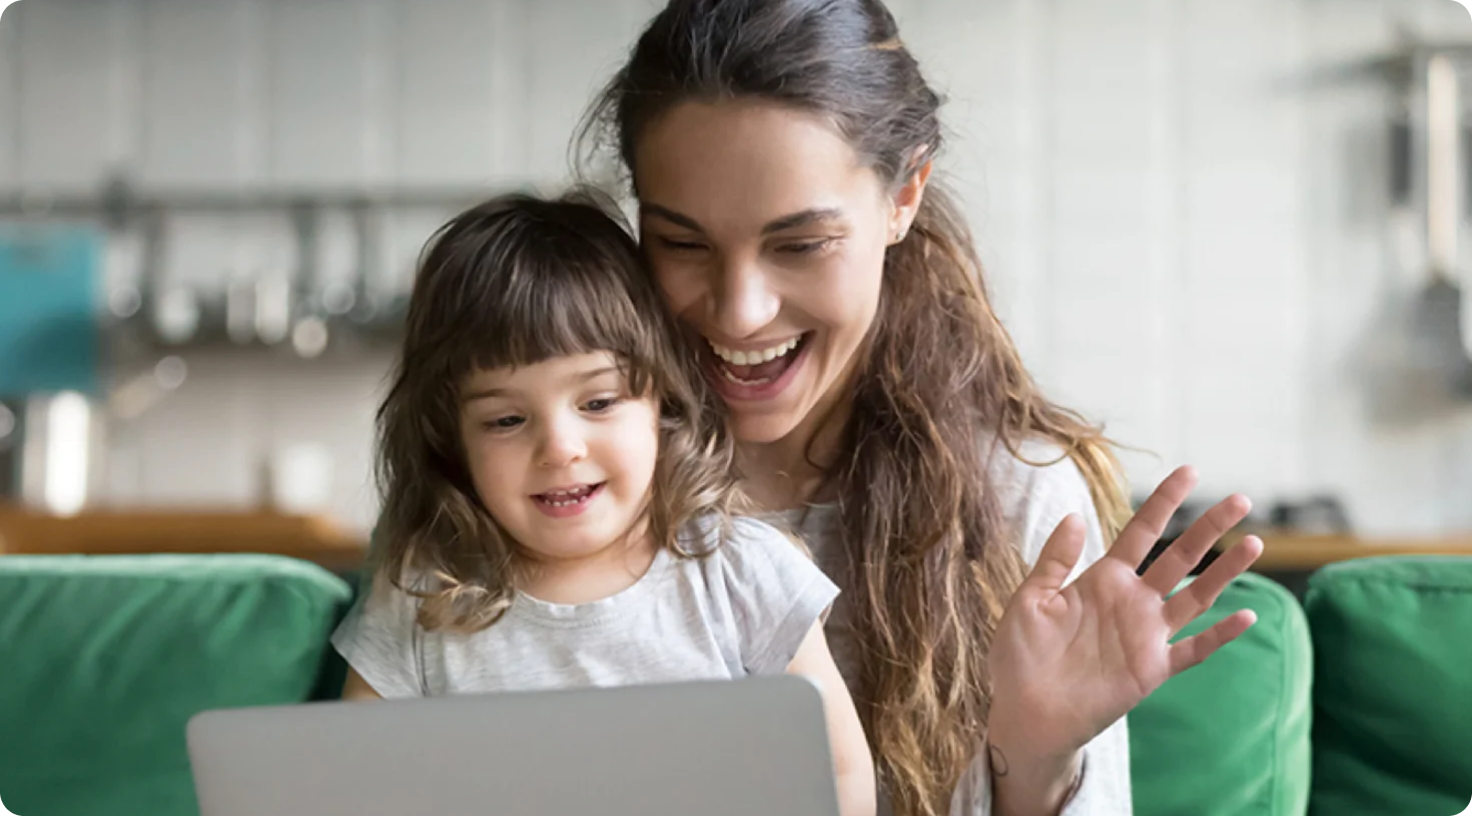 A woman and young child smiling while viewing a laptop